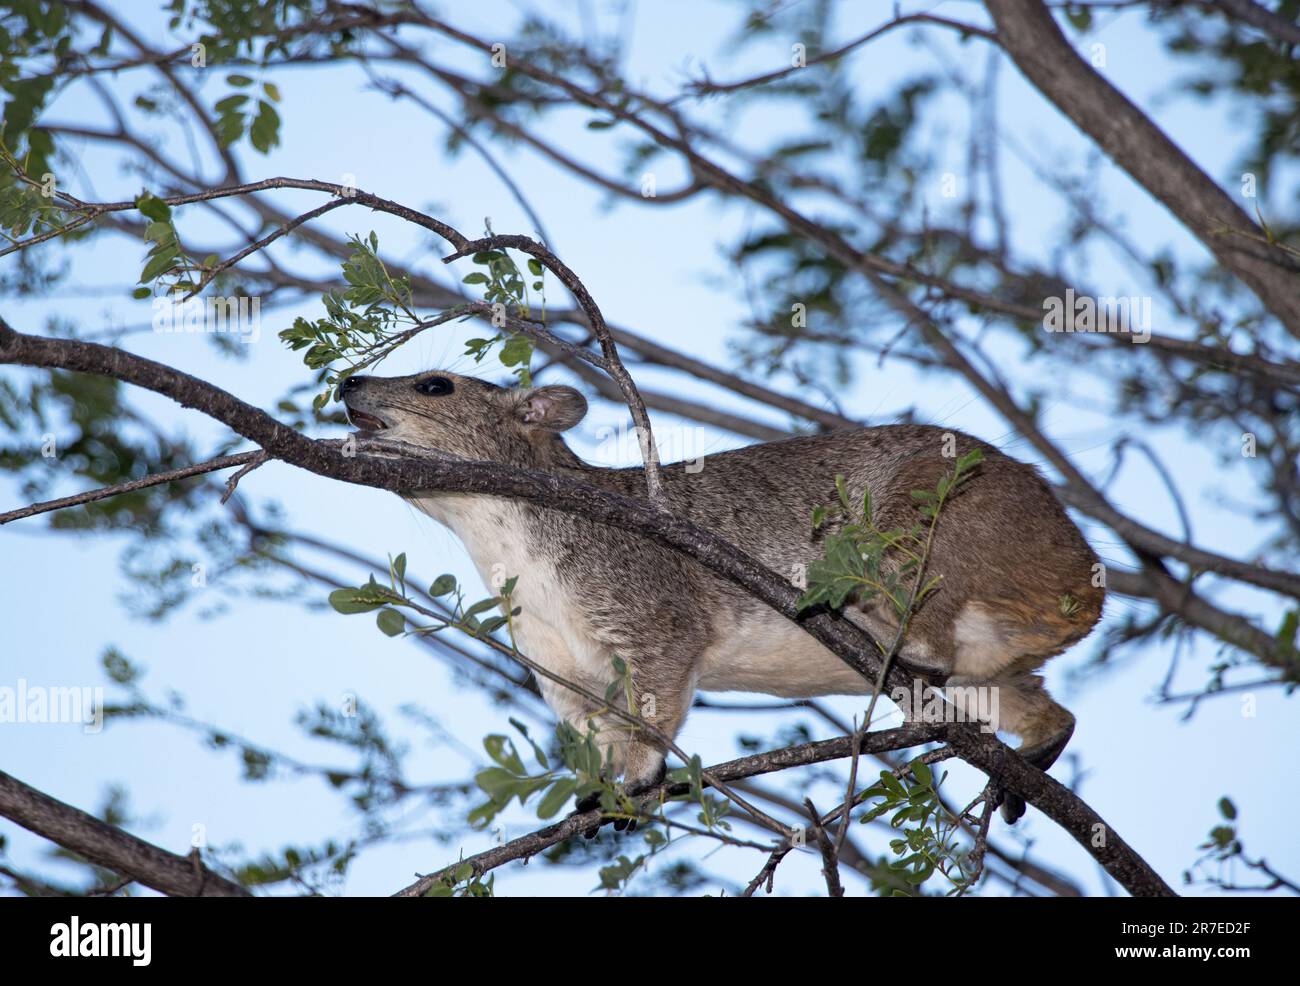 A Bush Hyrax browses precariously up in the branches of a tall tree. They prefer tough leaved trees which probably reduces competition with others. Stock Photo